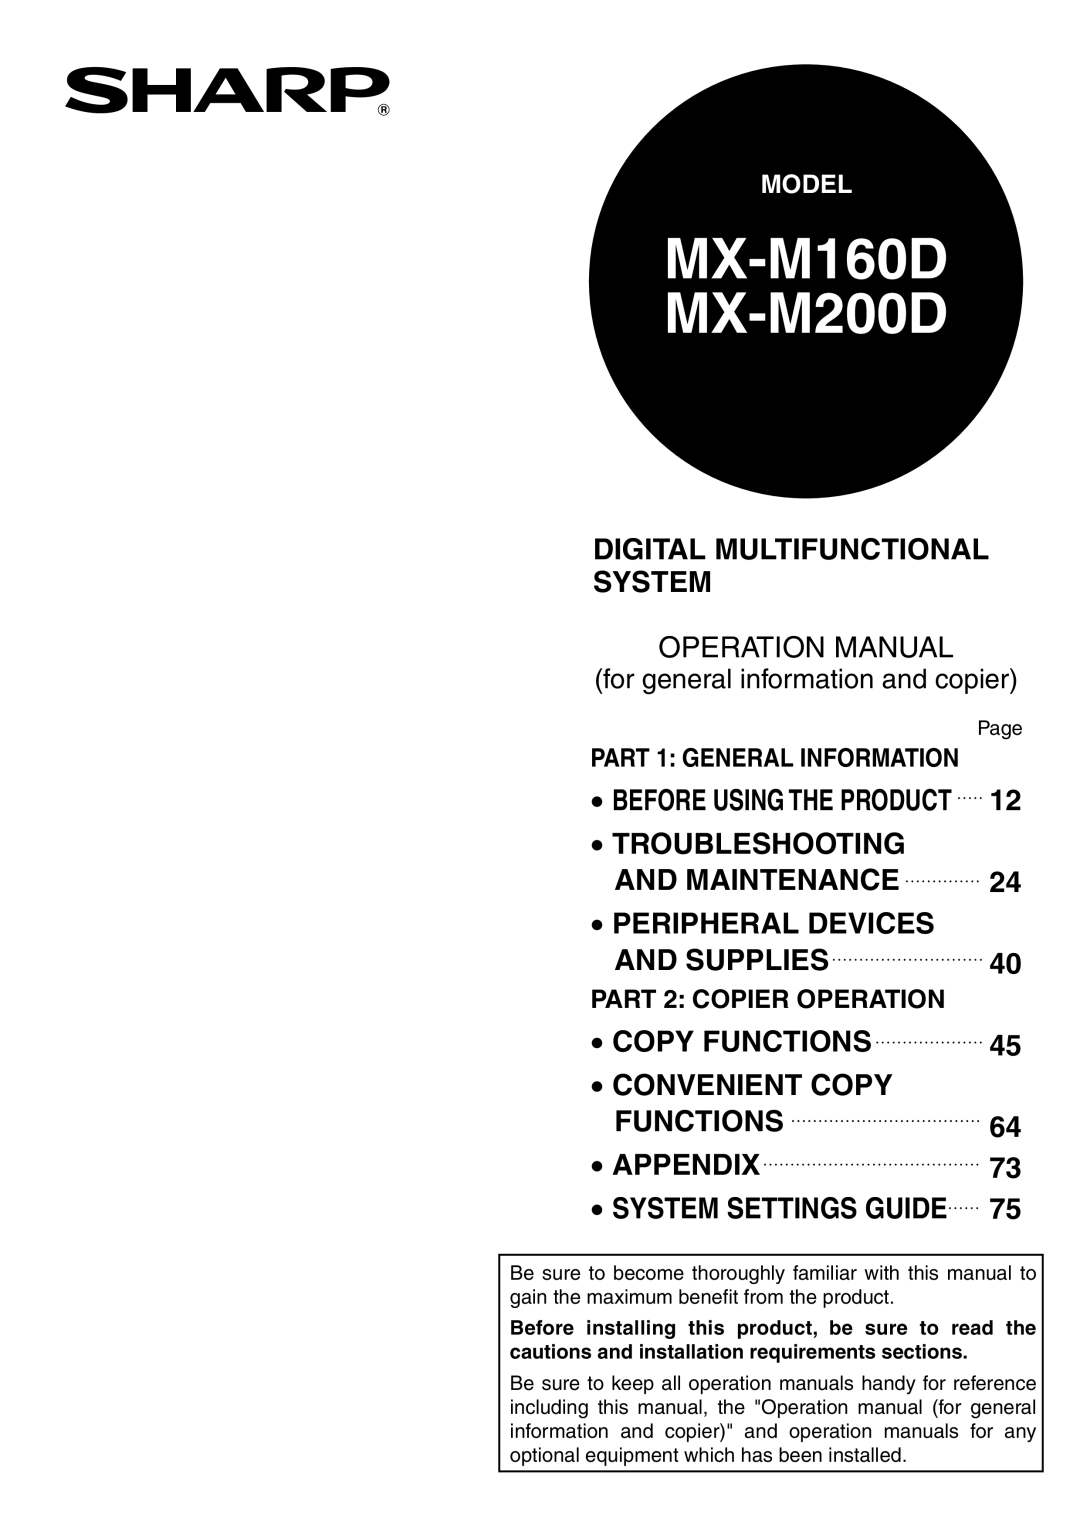 Sharp MX-M200D operation manual Digital Multifunctional System, Before Using The Product Troubleshooting, And Maintenance 